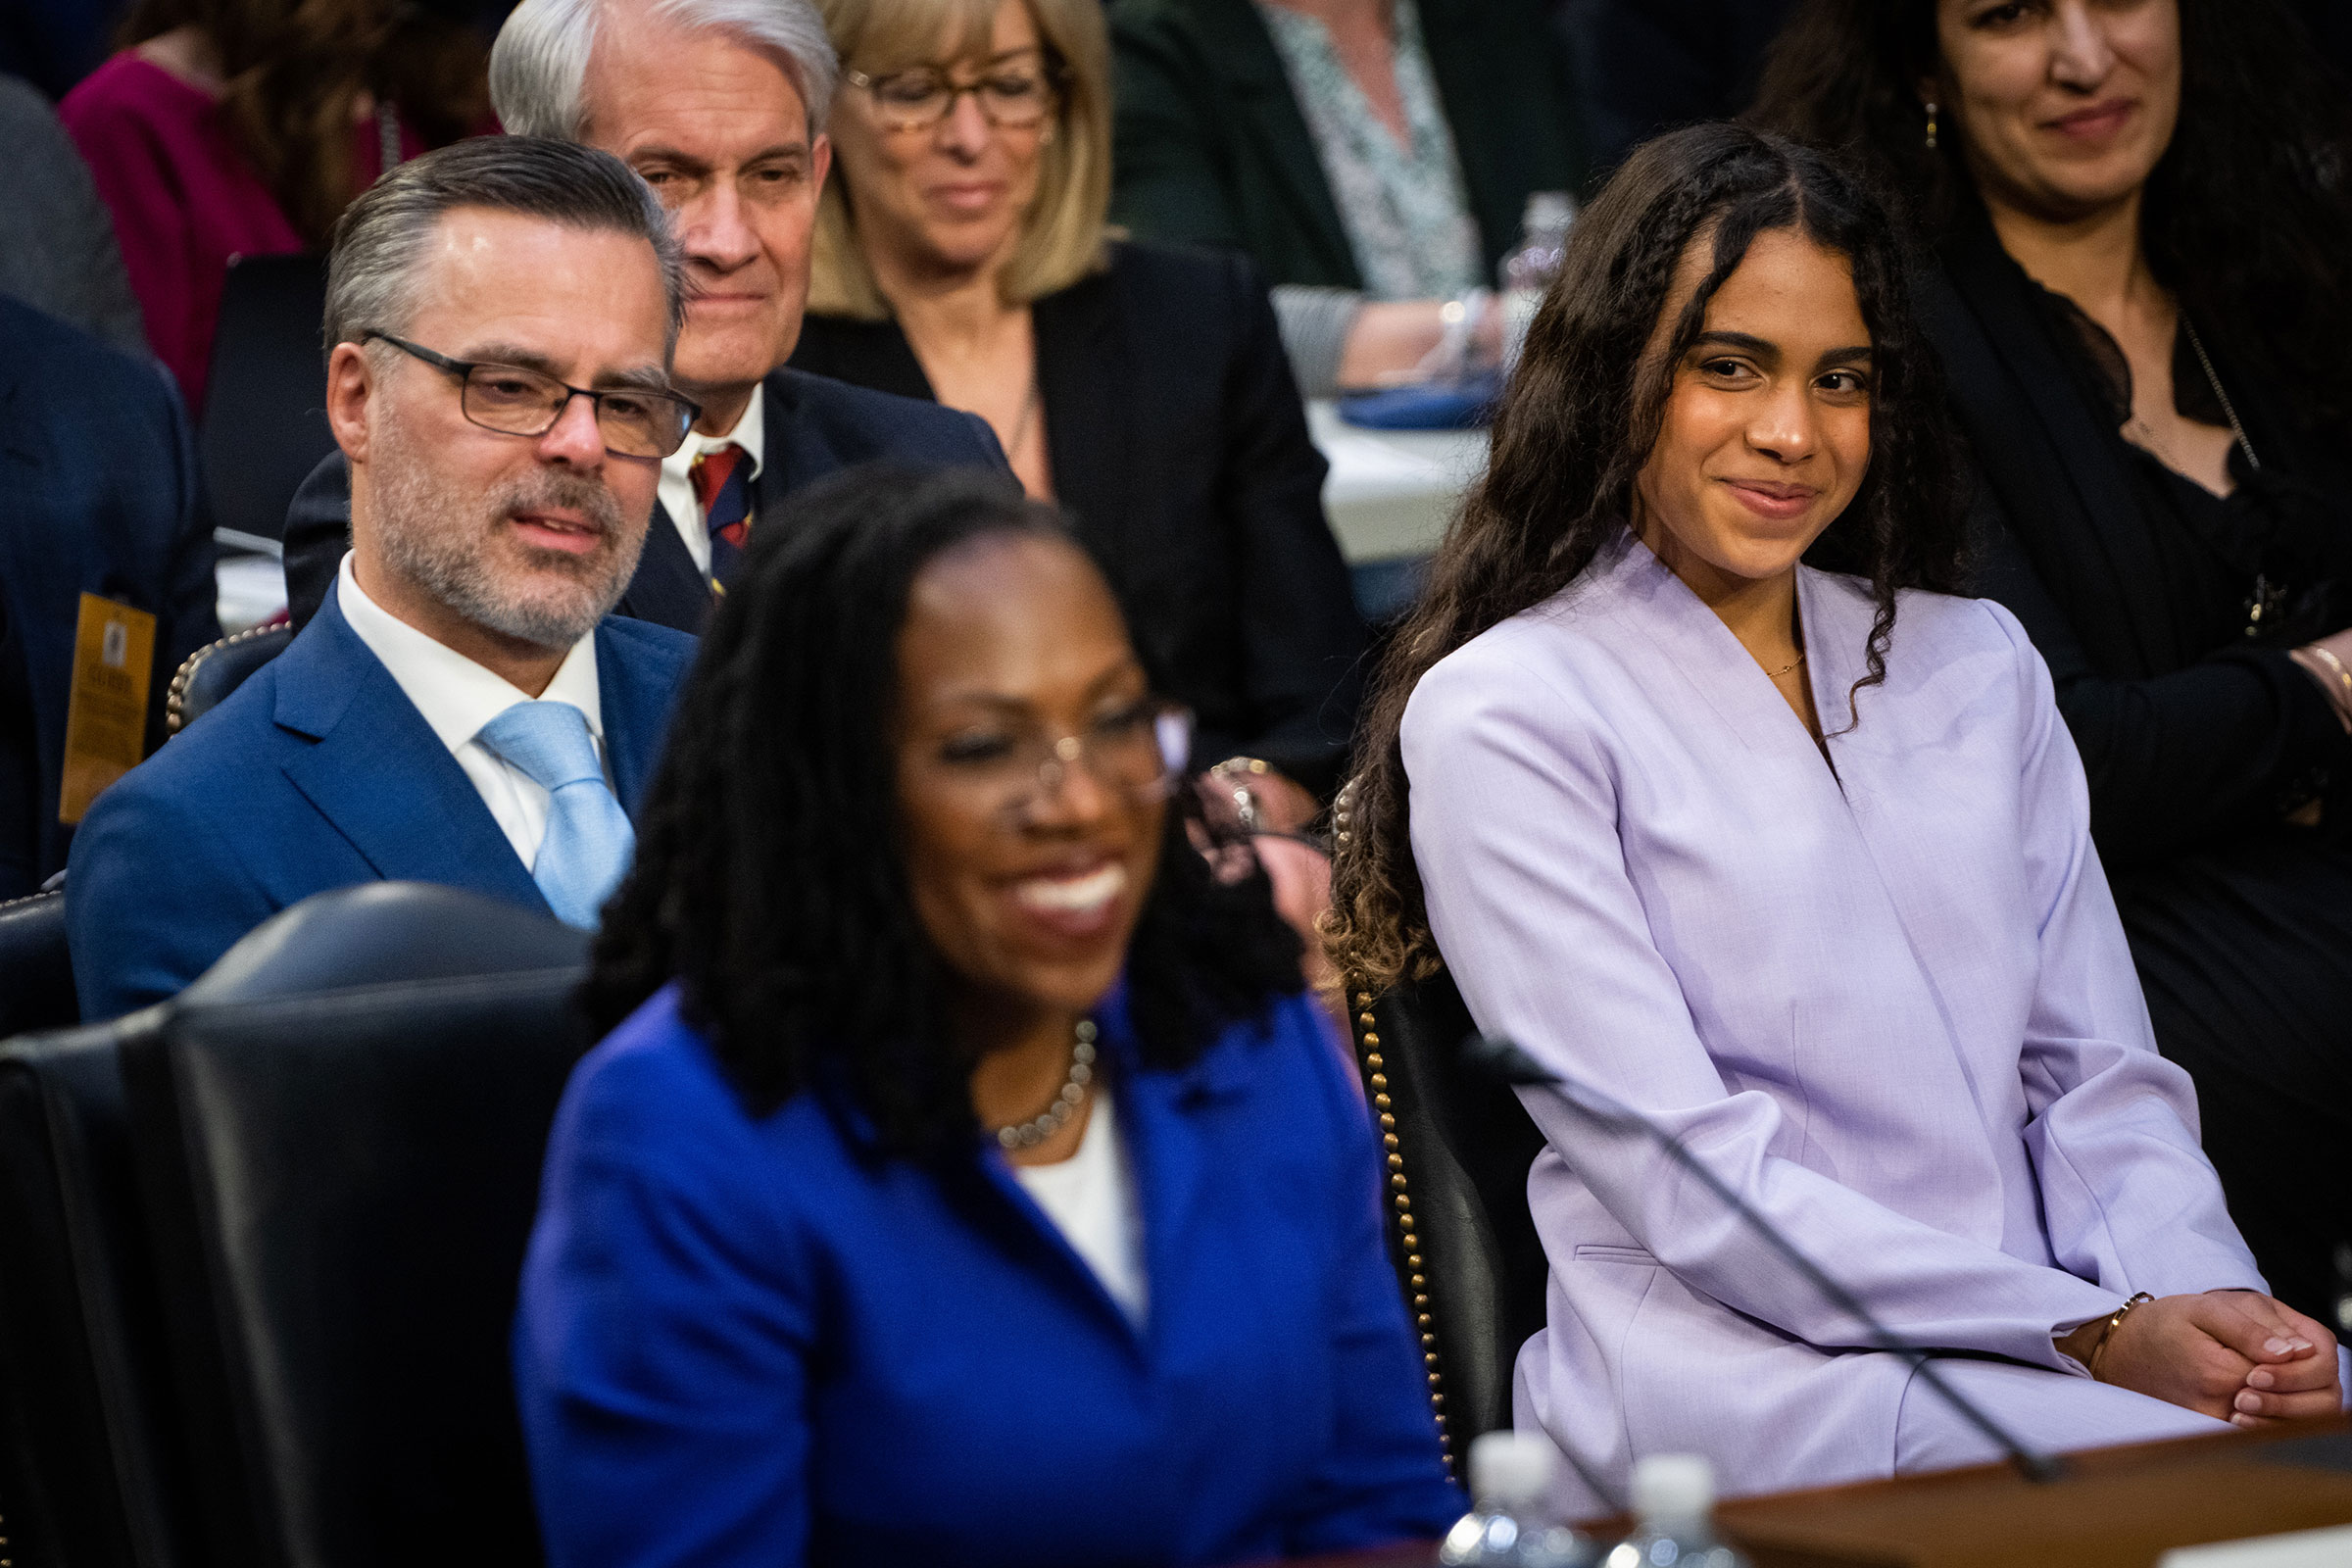 Patrick Jackson, left, husband of Supreme Court nominee Ketanji Brown Jackson, center, and daughter Leila Jackson, right, look on during confirmation hearings in Washington,on March 21.